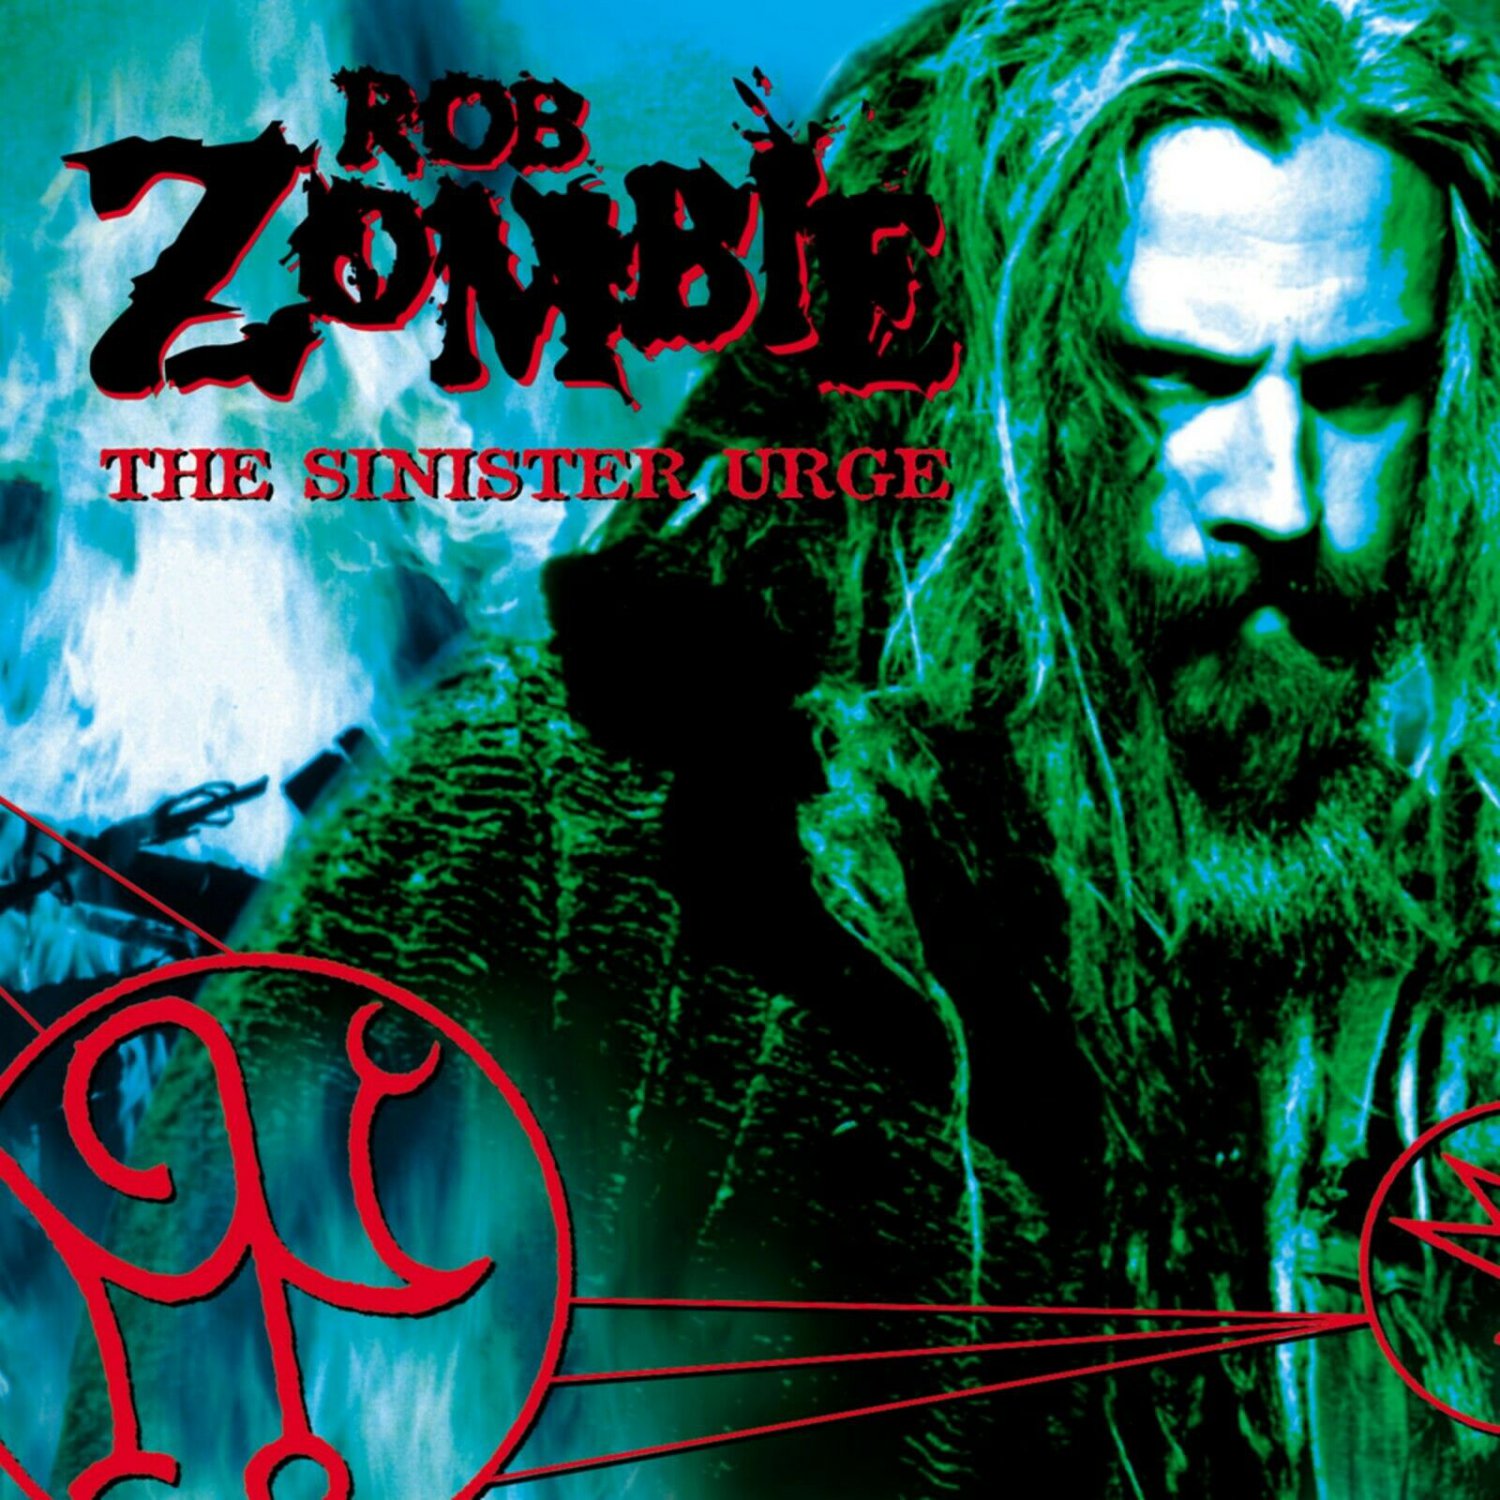 ROB ZOMBIE The Sinister Urge BANNER Huge 4X4 Ft Fabric Poster Tapestry Flag Print album cover art